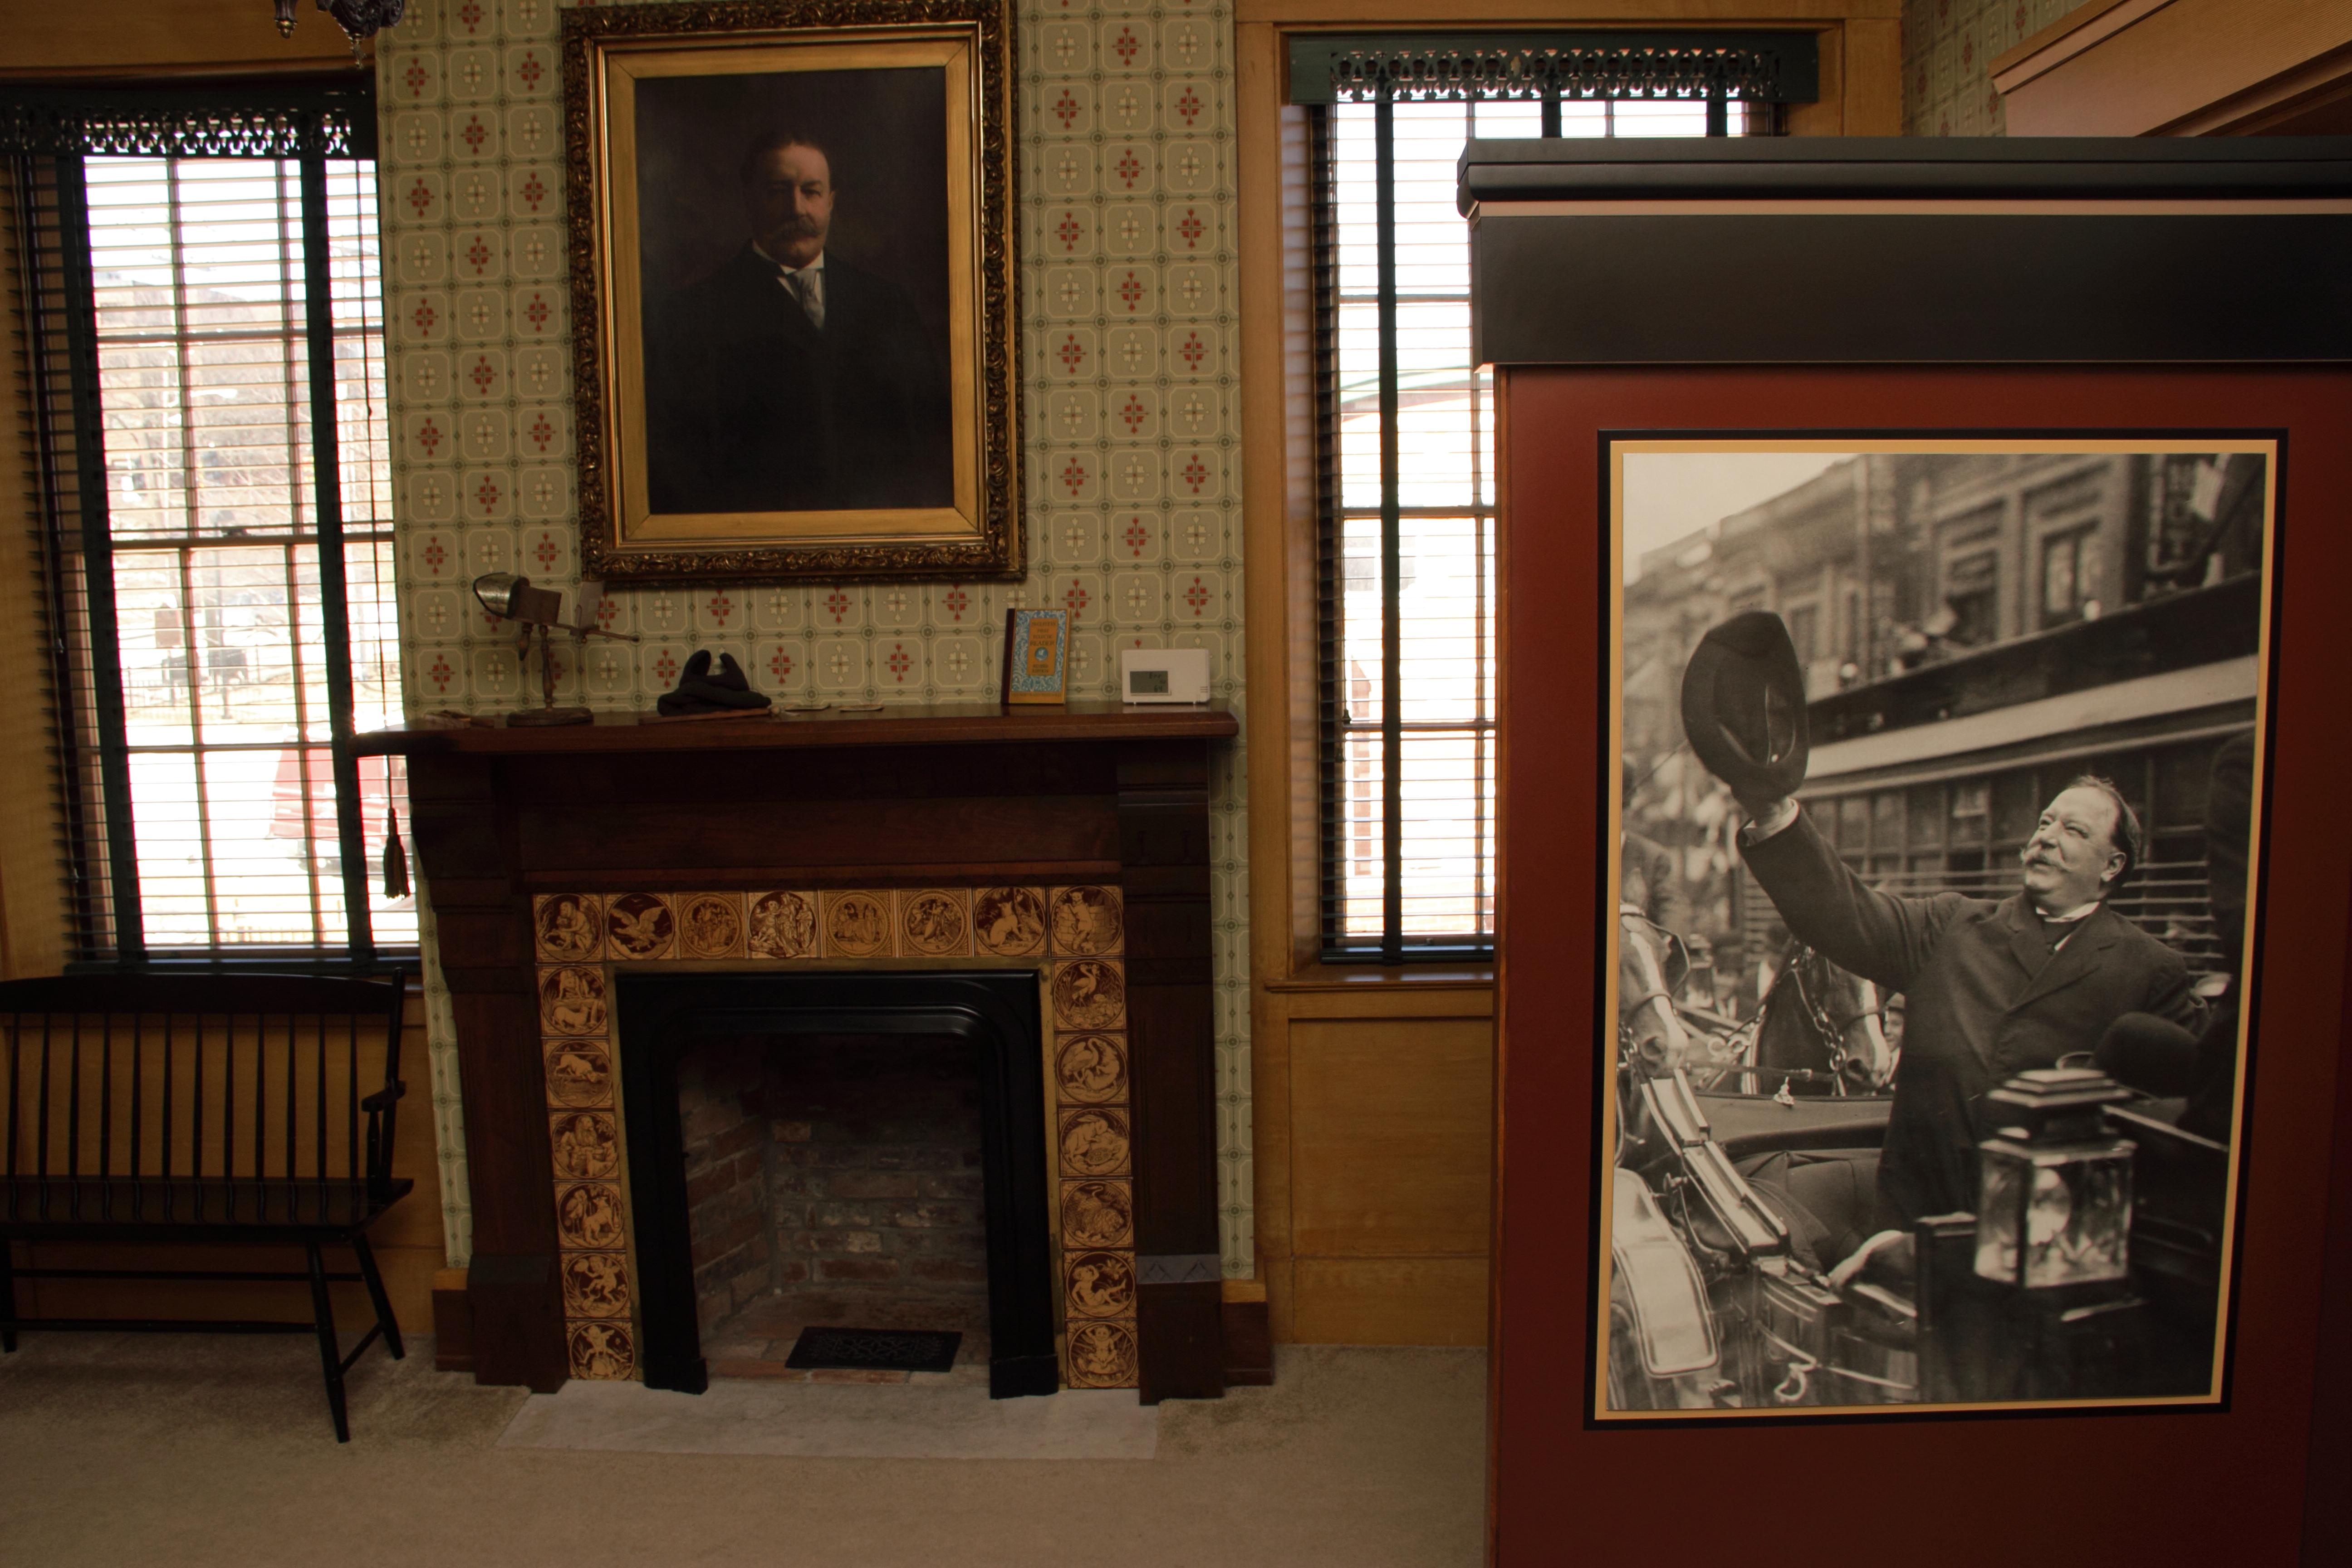 A room inside of a house showing two portraits of men and a fireplace on a wall between two windows.